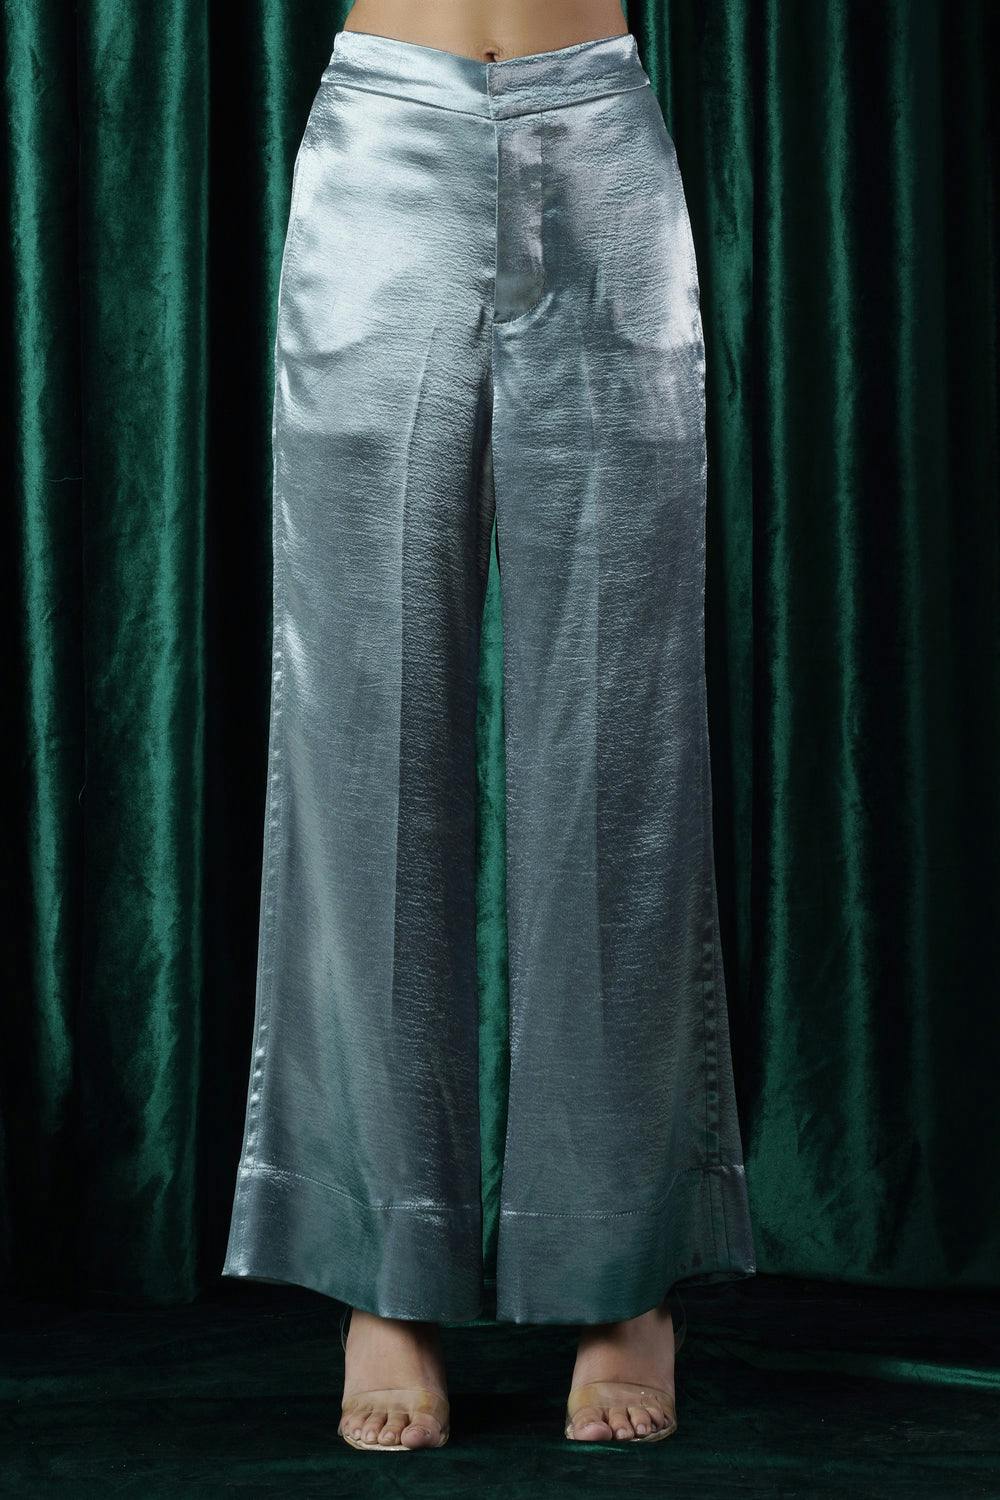 Victoria Flared Satin Pants, a product by Belucci